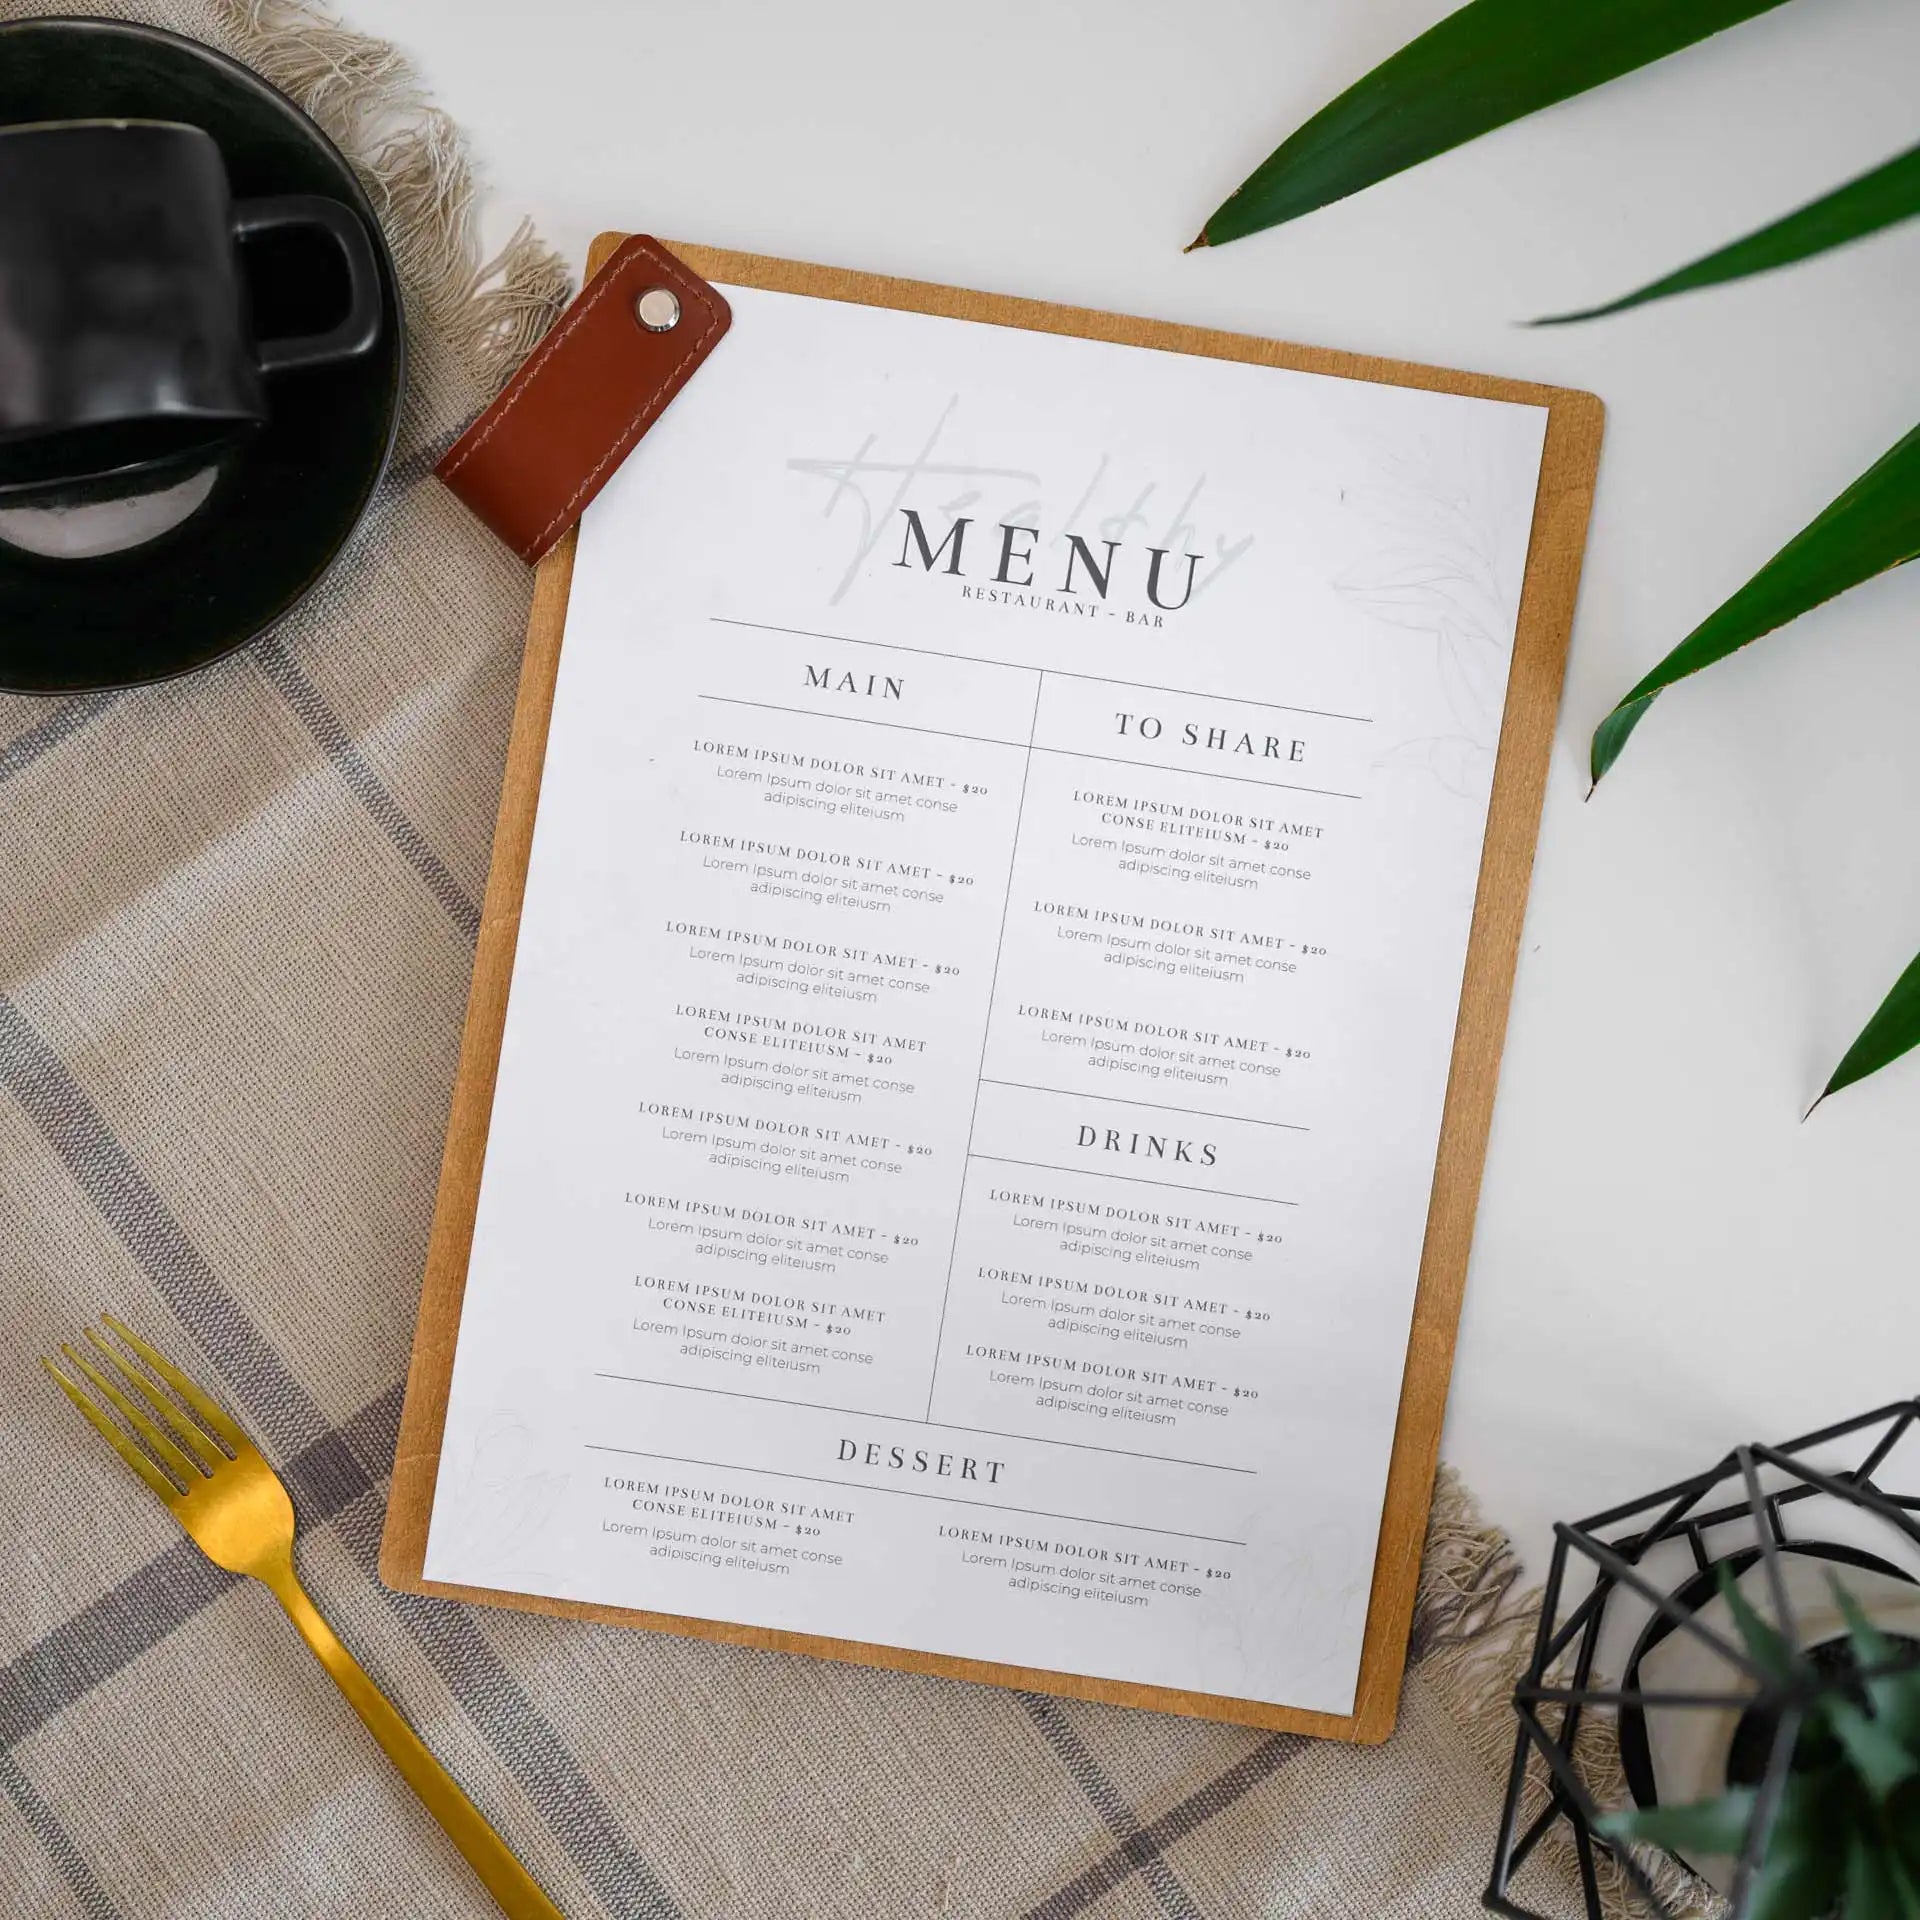 Wooden Menu Board with Logo Engraving: Add sophistication with personalized branding.